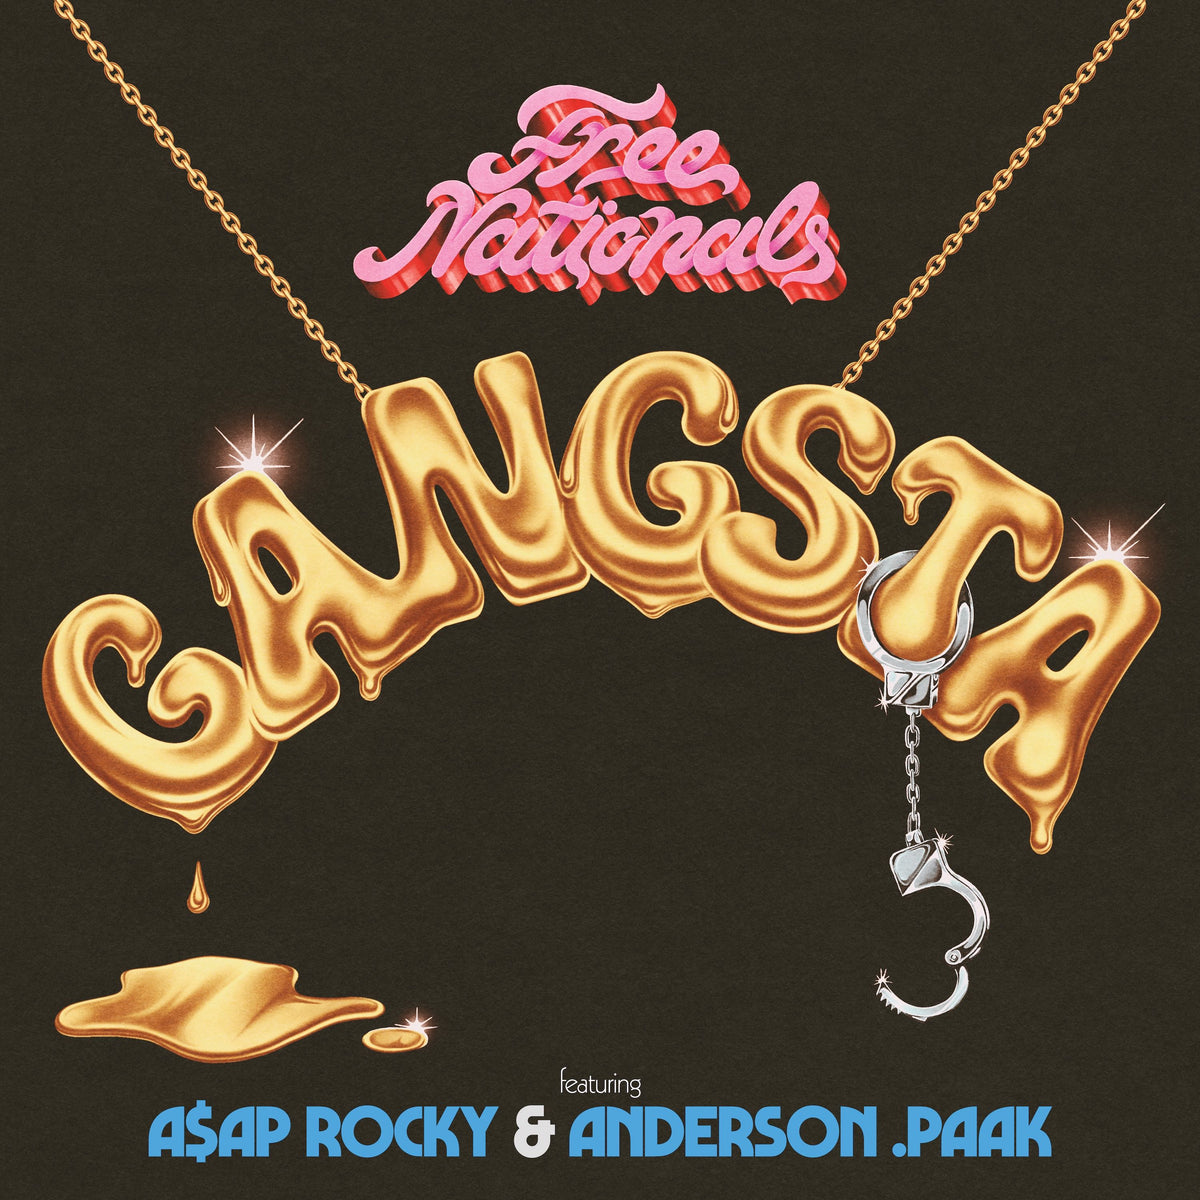 Gangsta (Feat Asap Rocky and Anderson .Paak)